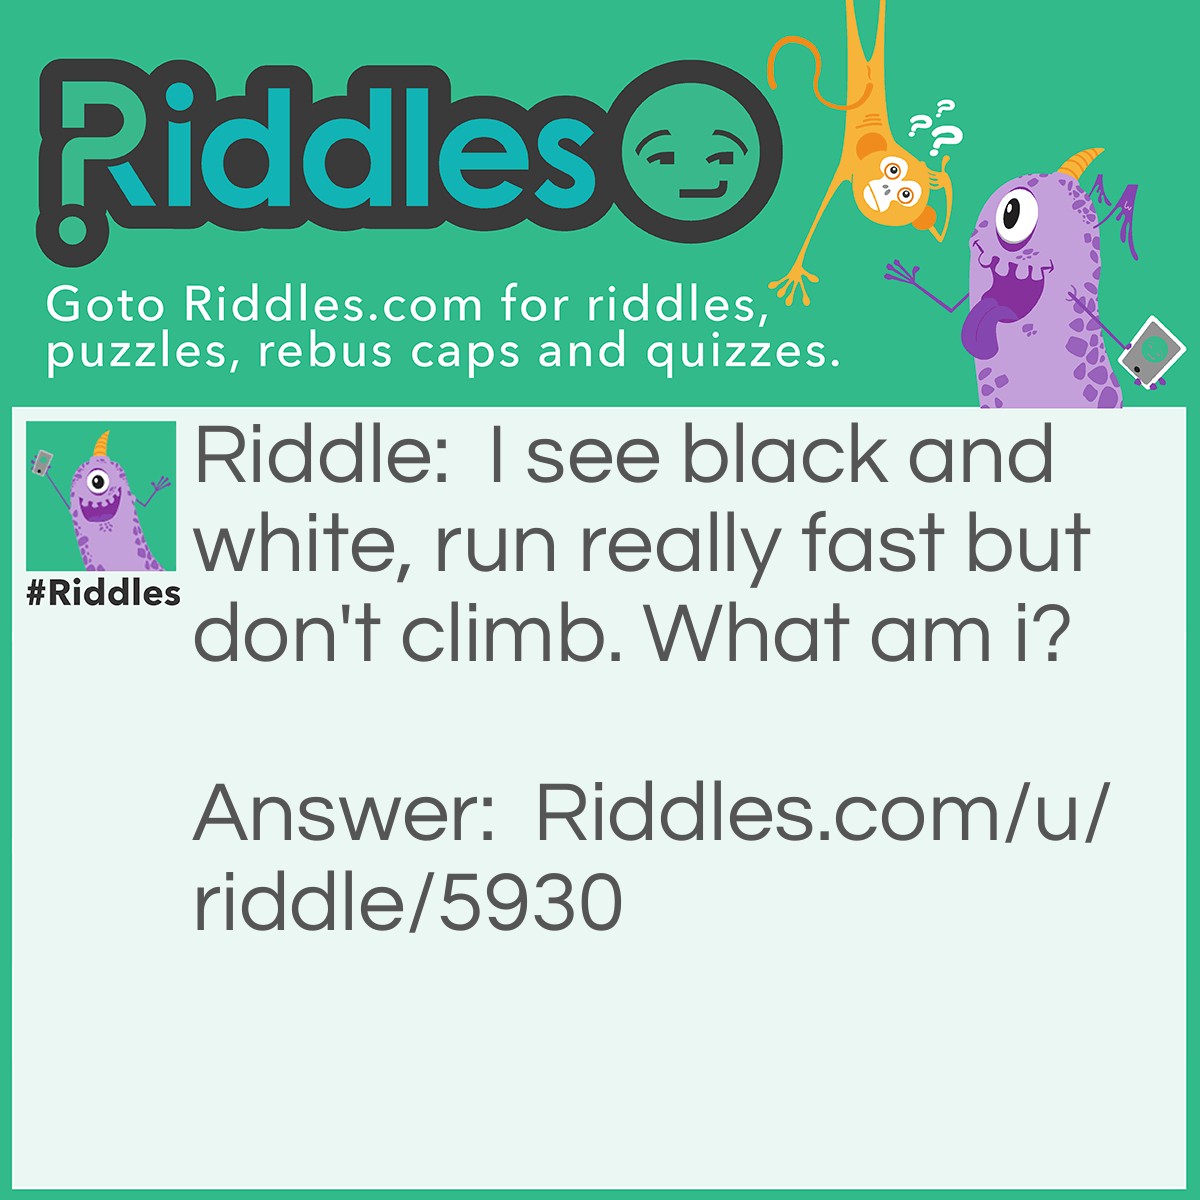 Riddle: I see black and white, run really fast but don't climb. What am i? Answer: A dog.